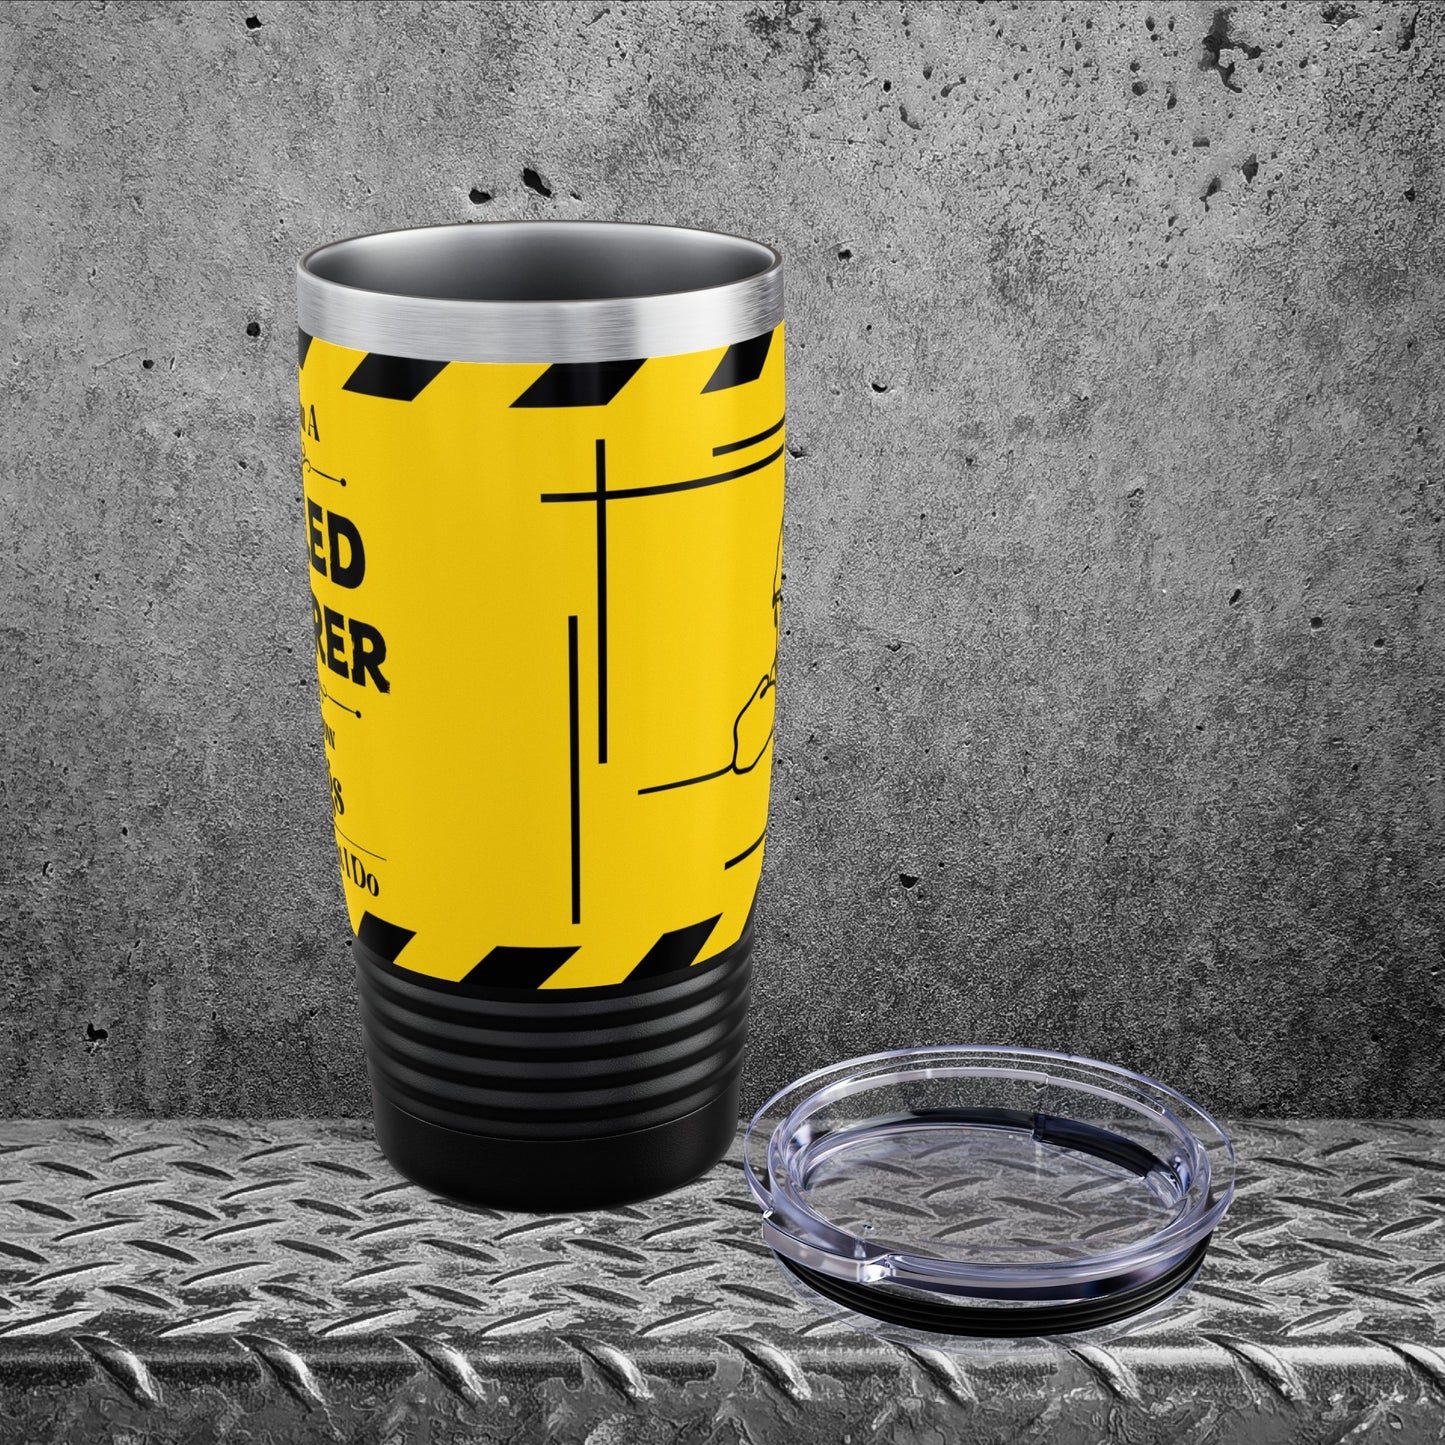 Relax, I'm A SKILLED LABORER, And I Know Things - Ringneck Tumbler, 20oz